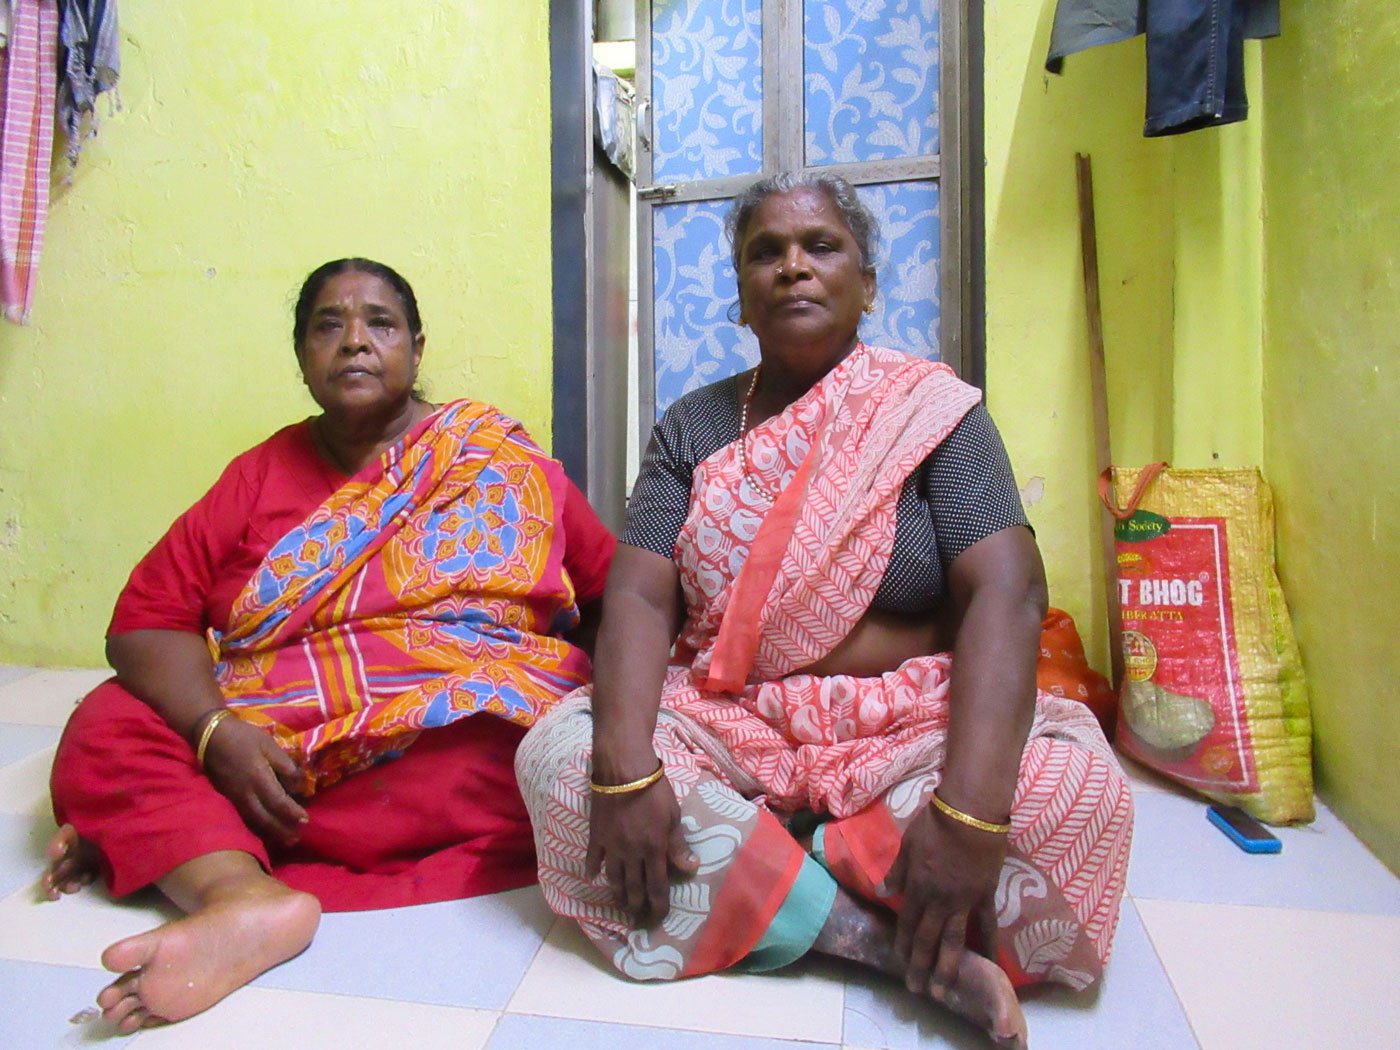 Pushpaveni (left) came to Dharavi as a bride at the age of 14-15, Vasanti arrived here when she got married at 20